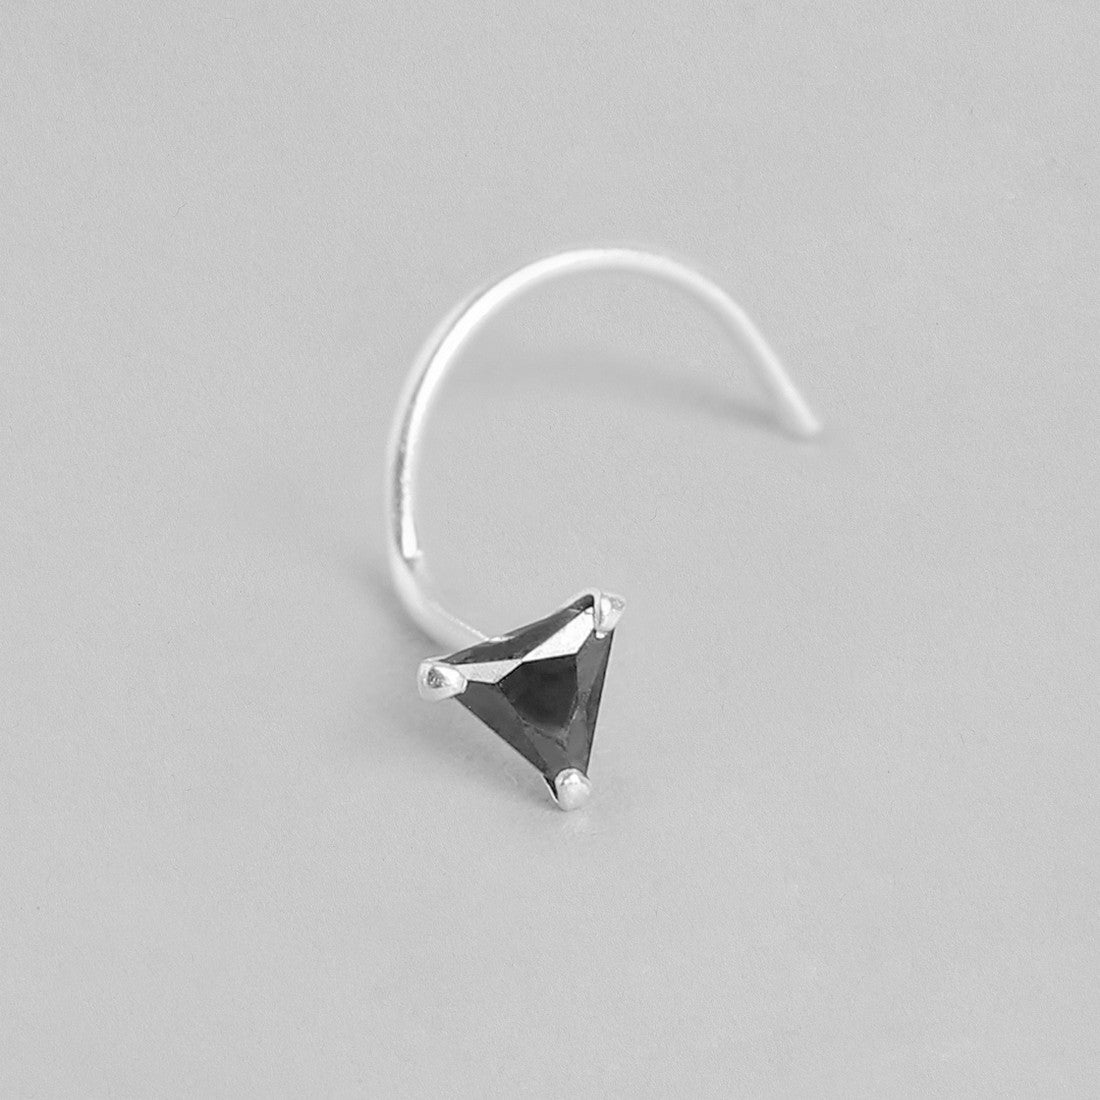 The Black & White Duo 925 Silver Nose Pin Set